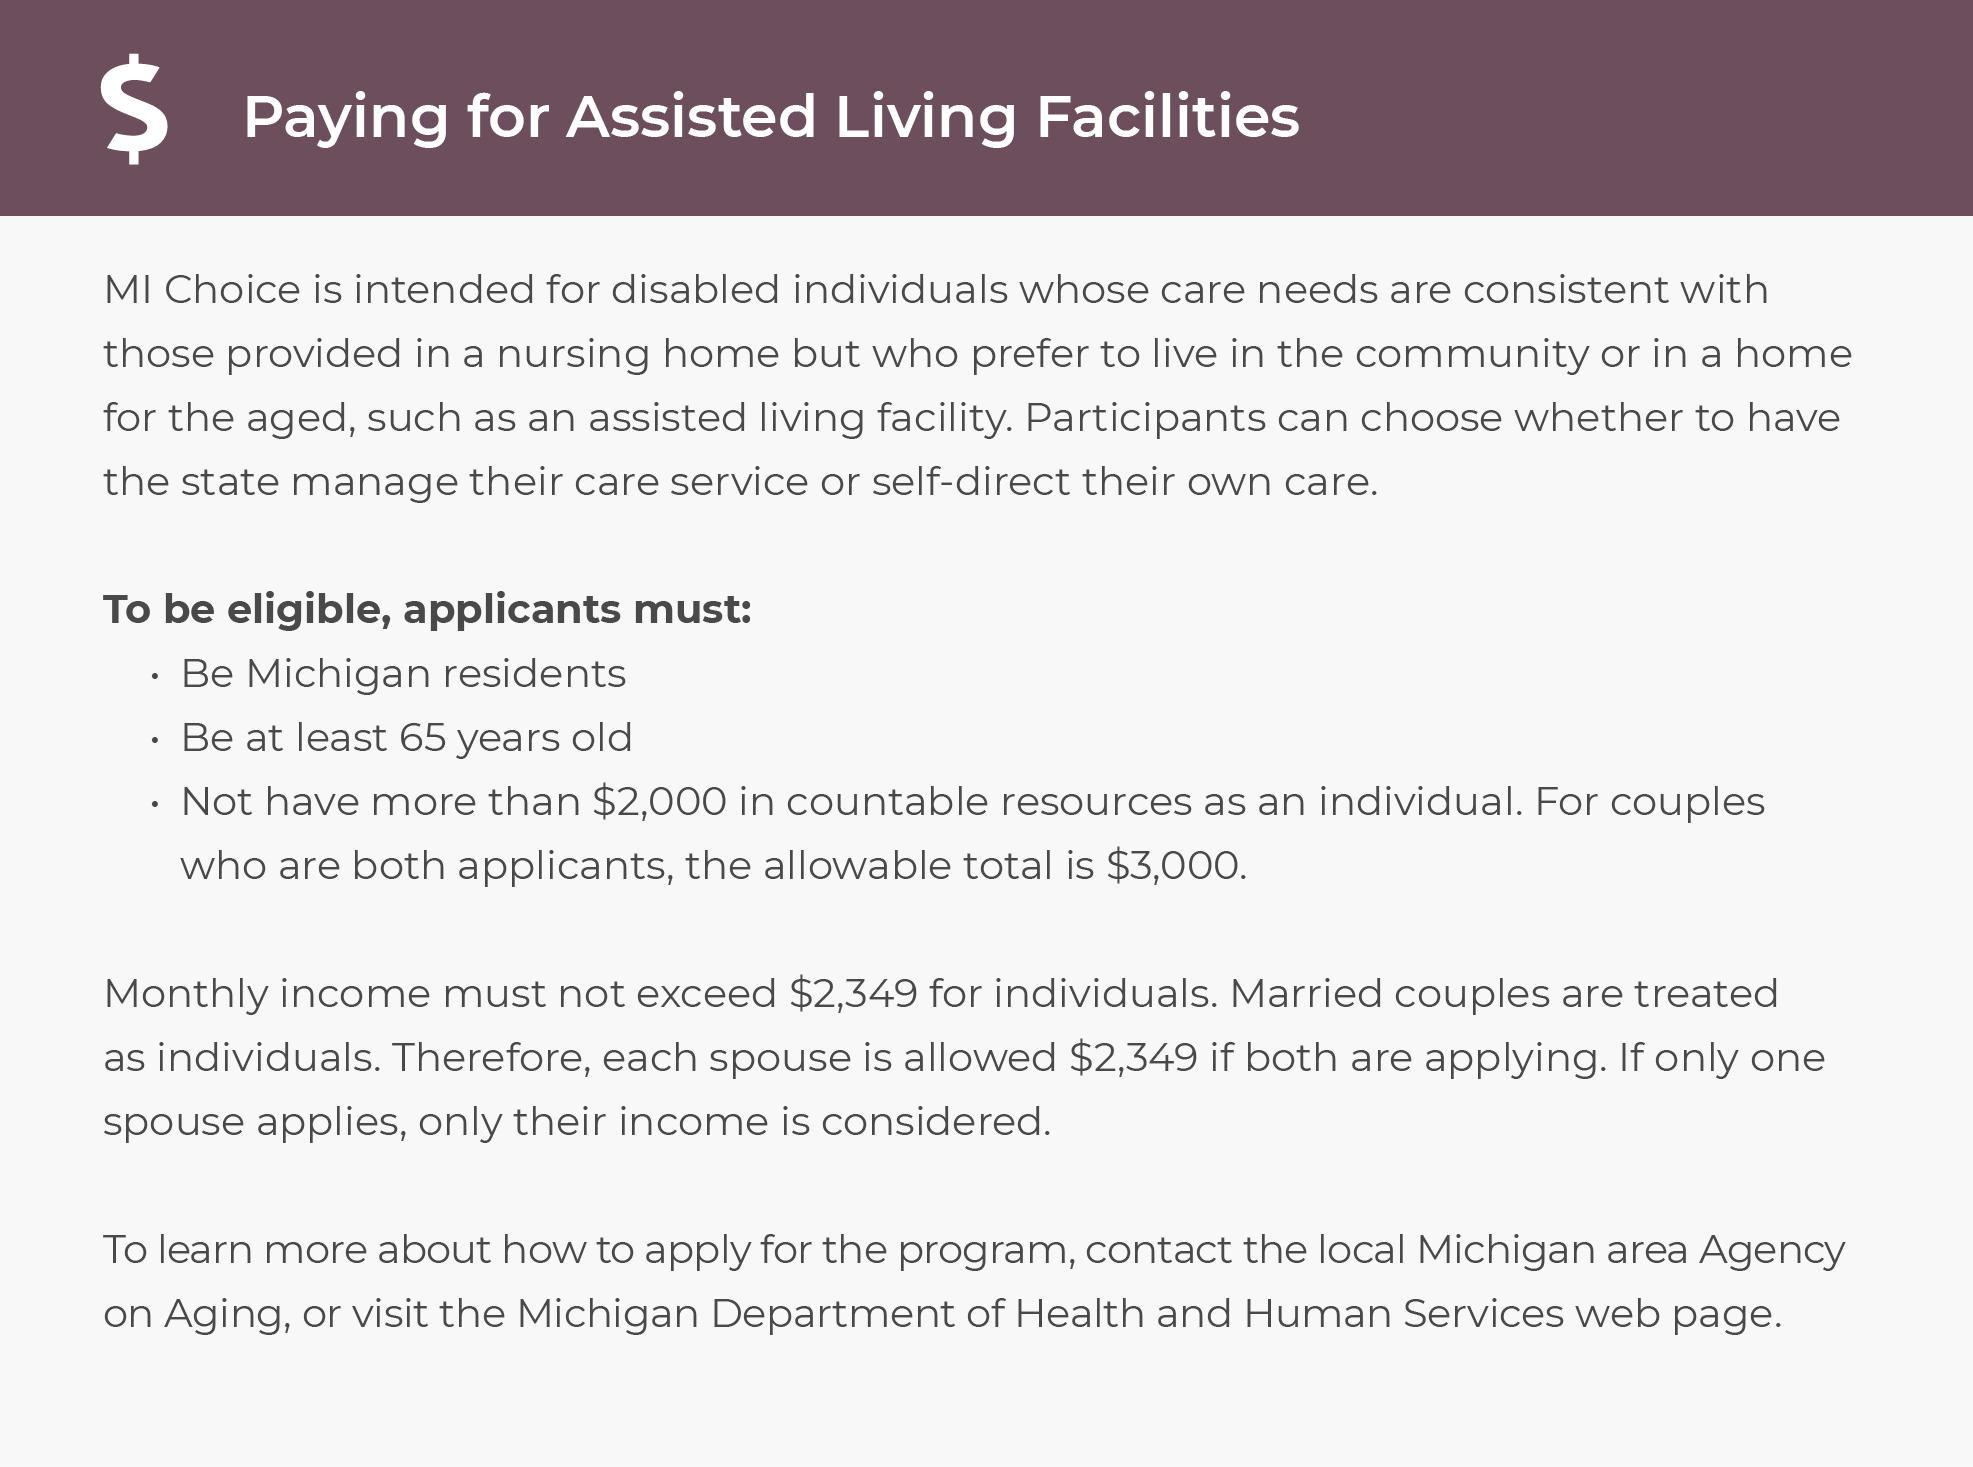 More ways to pay for Assisted Living in Michigan